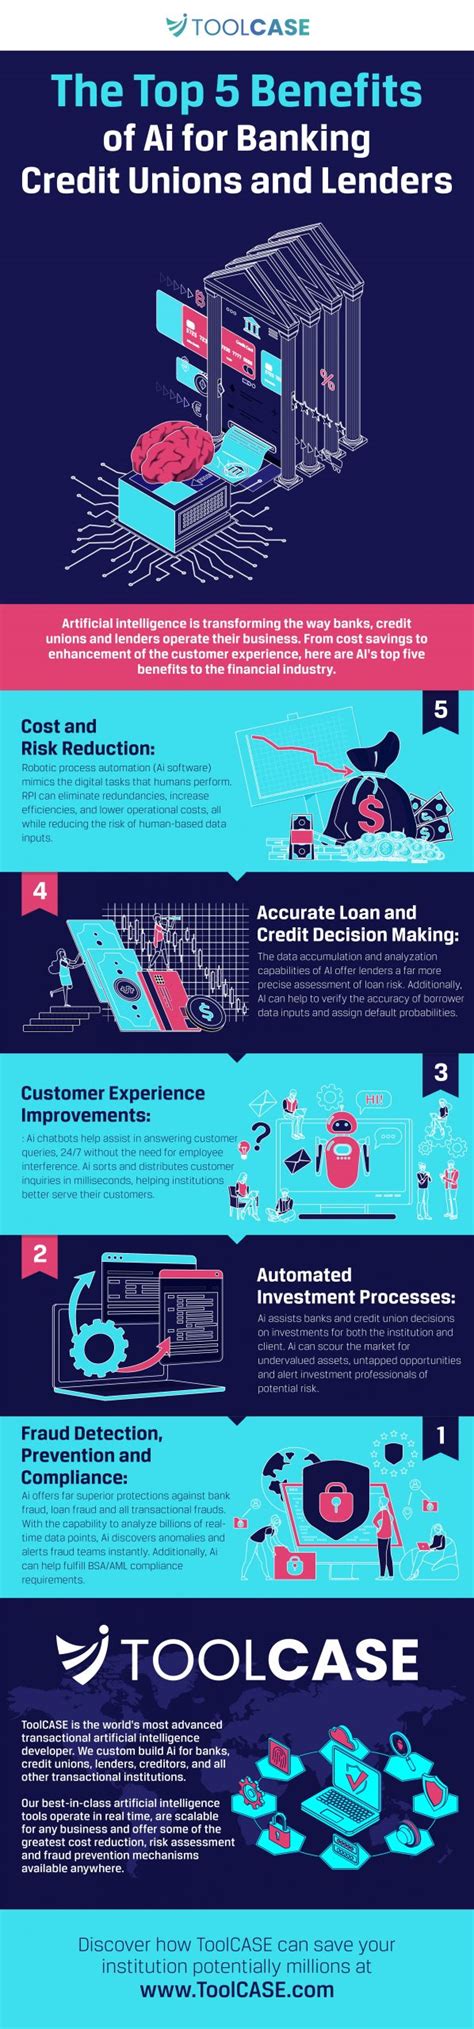 Top 5 Benefits Of Ai For The Banking Credit Unions And Lenders